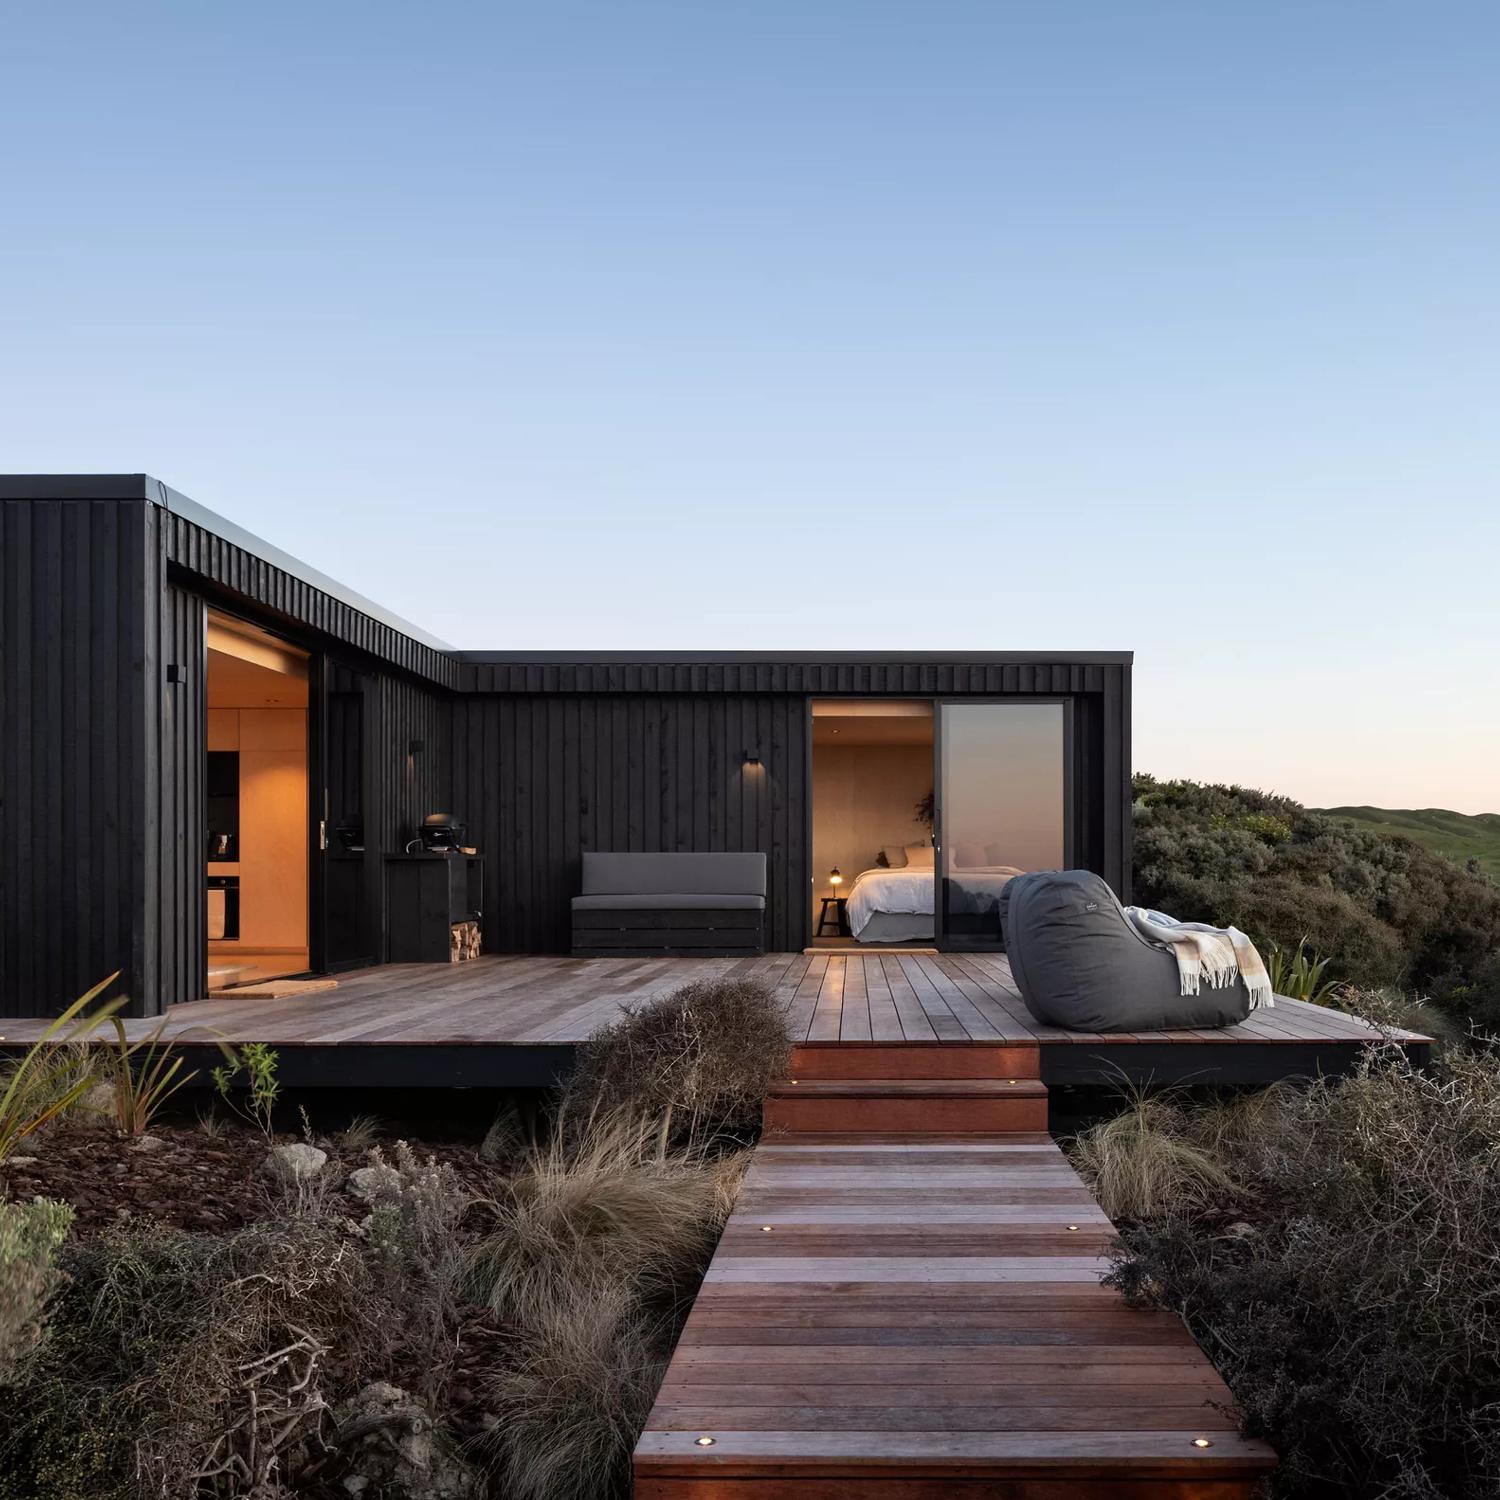 Pipinui Point is a cliffside luxury cabin located in Johnsonville, Wellington, surrounded by nature at every viewpoint.